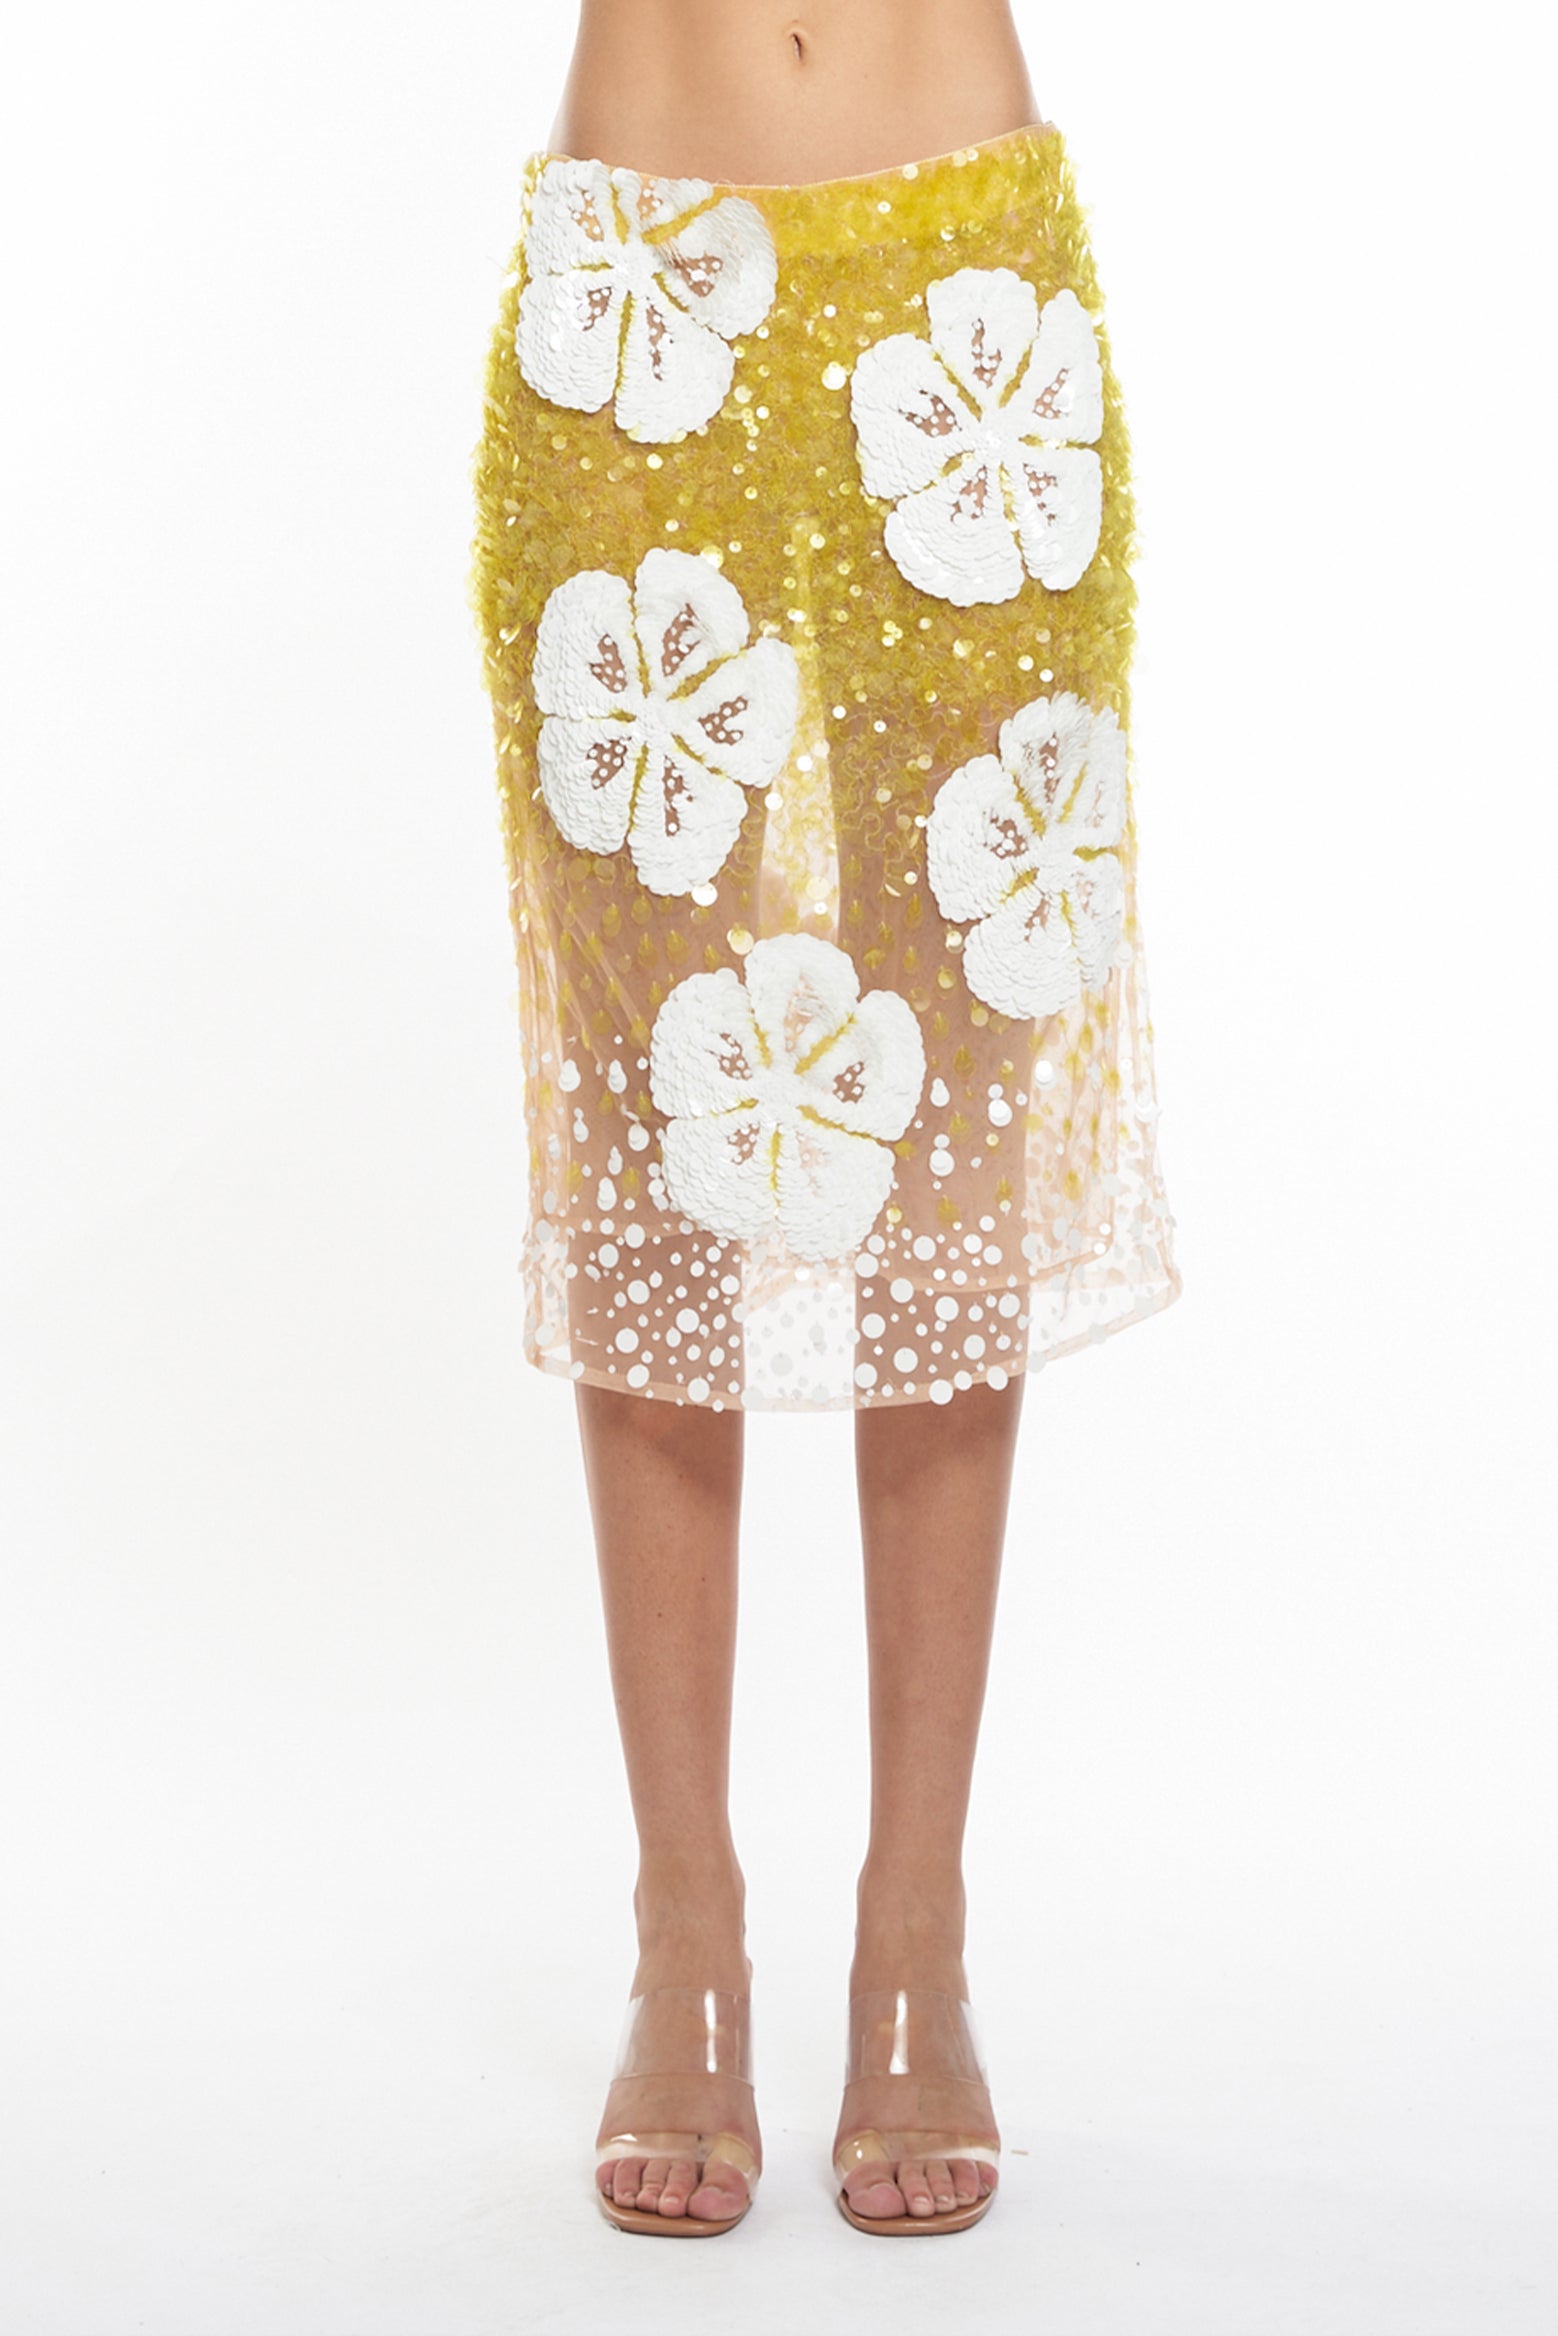 Des Phemmes Hibiscus Embroidery Skirt in Lime available at The New Trend Australia.